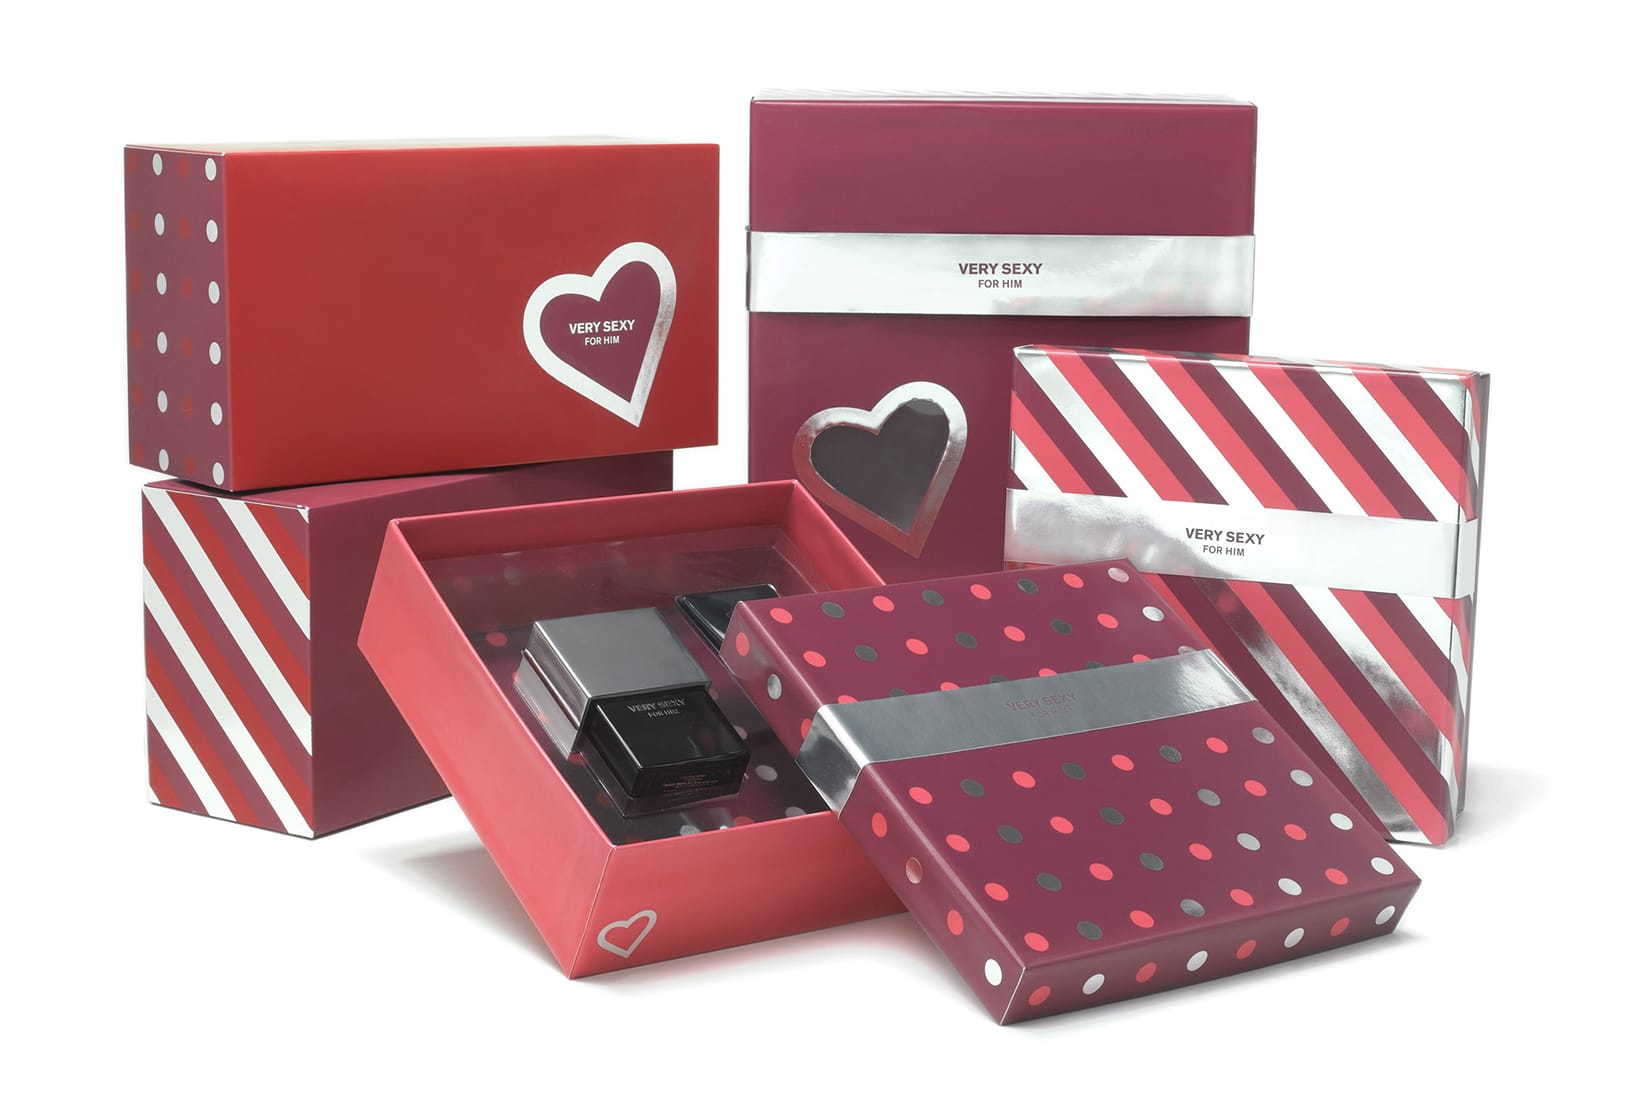 Victoria's Secret Very Sexy For Him box design in silver and red with polka dots, diagonal stripes, and heart icons.